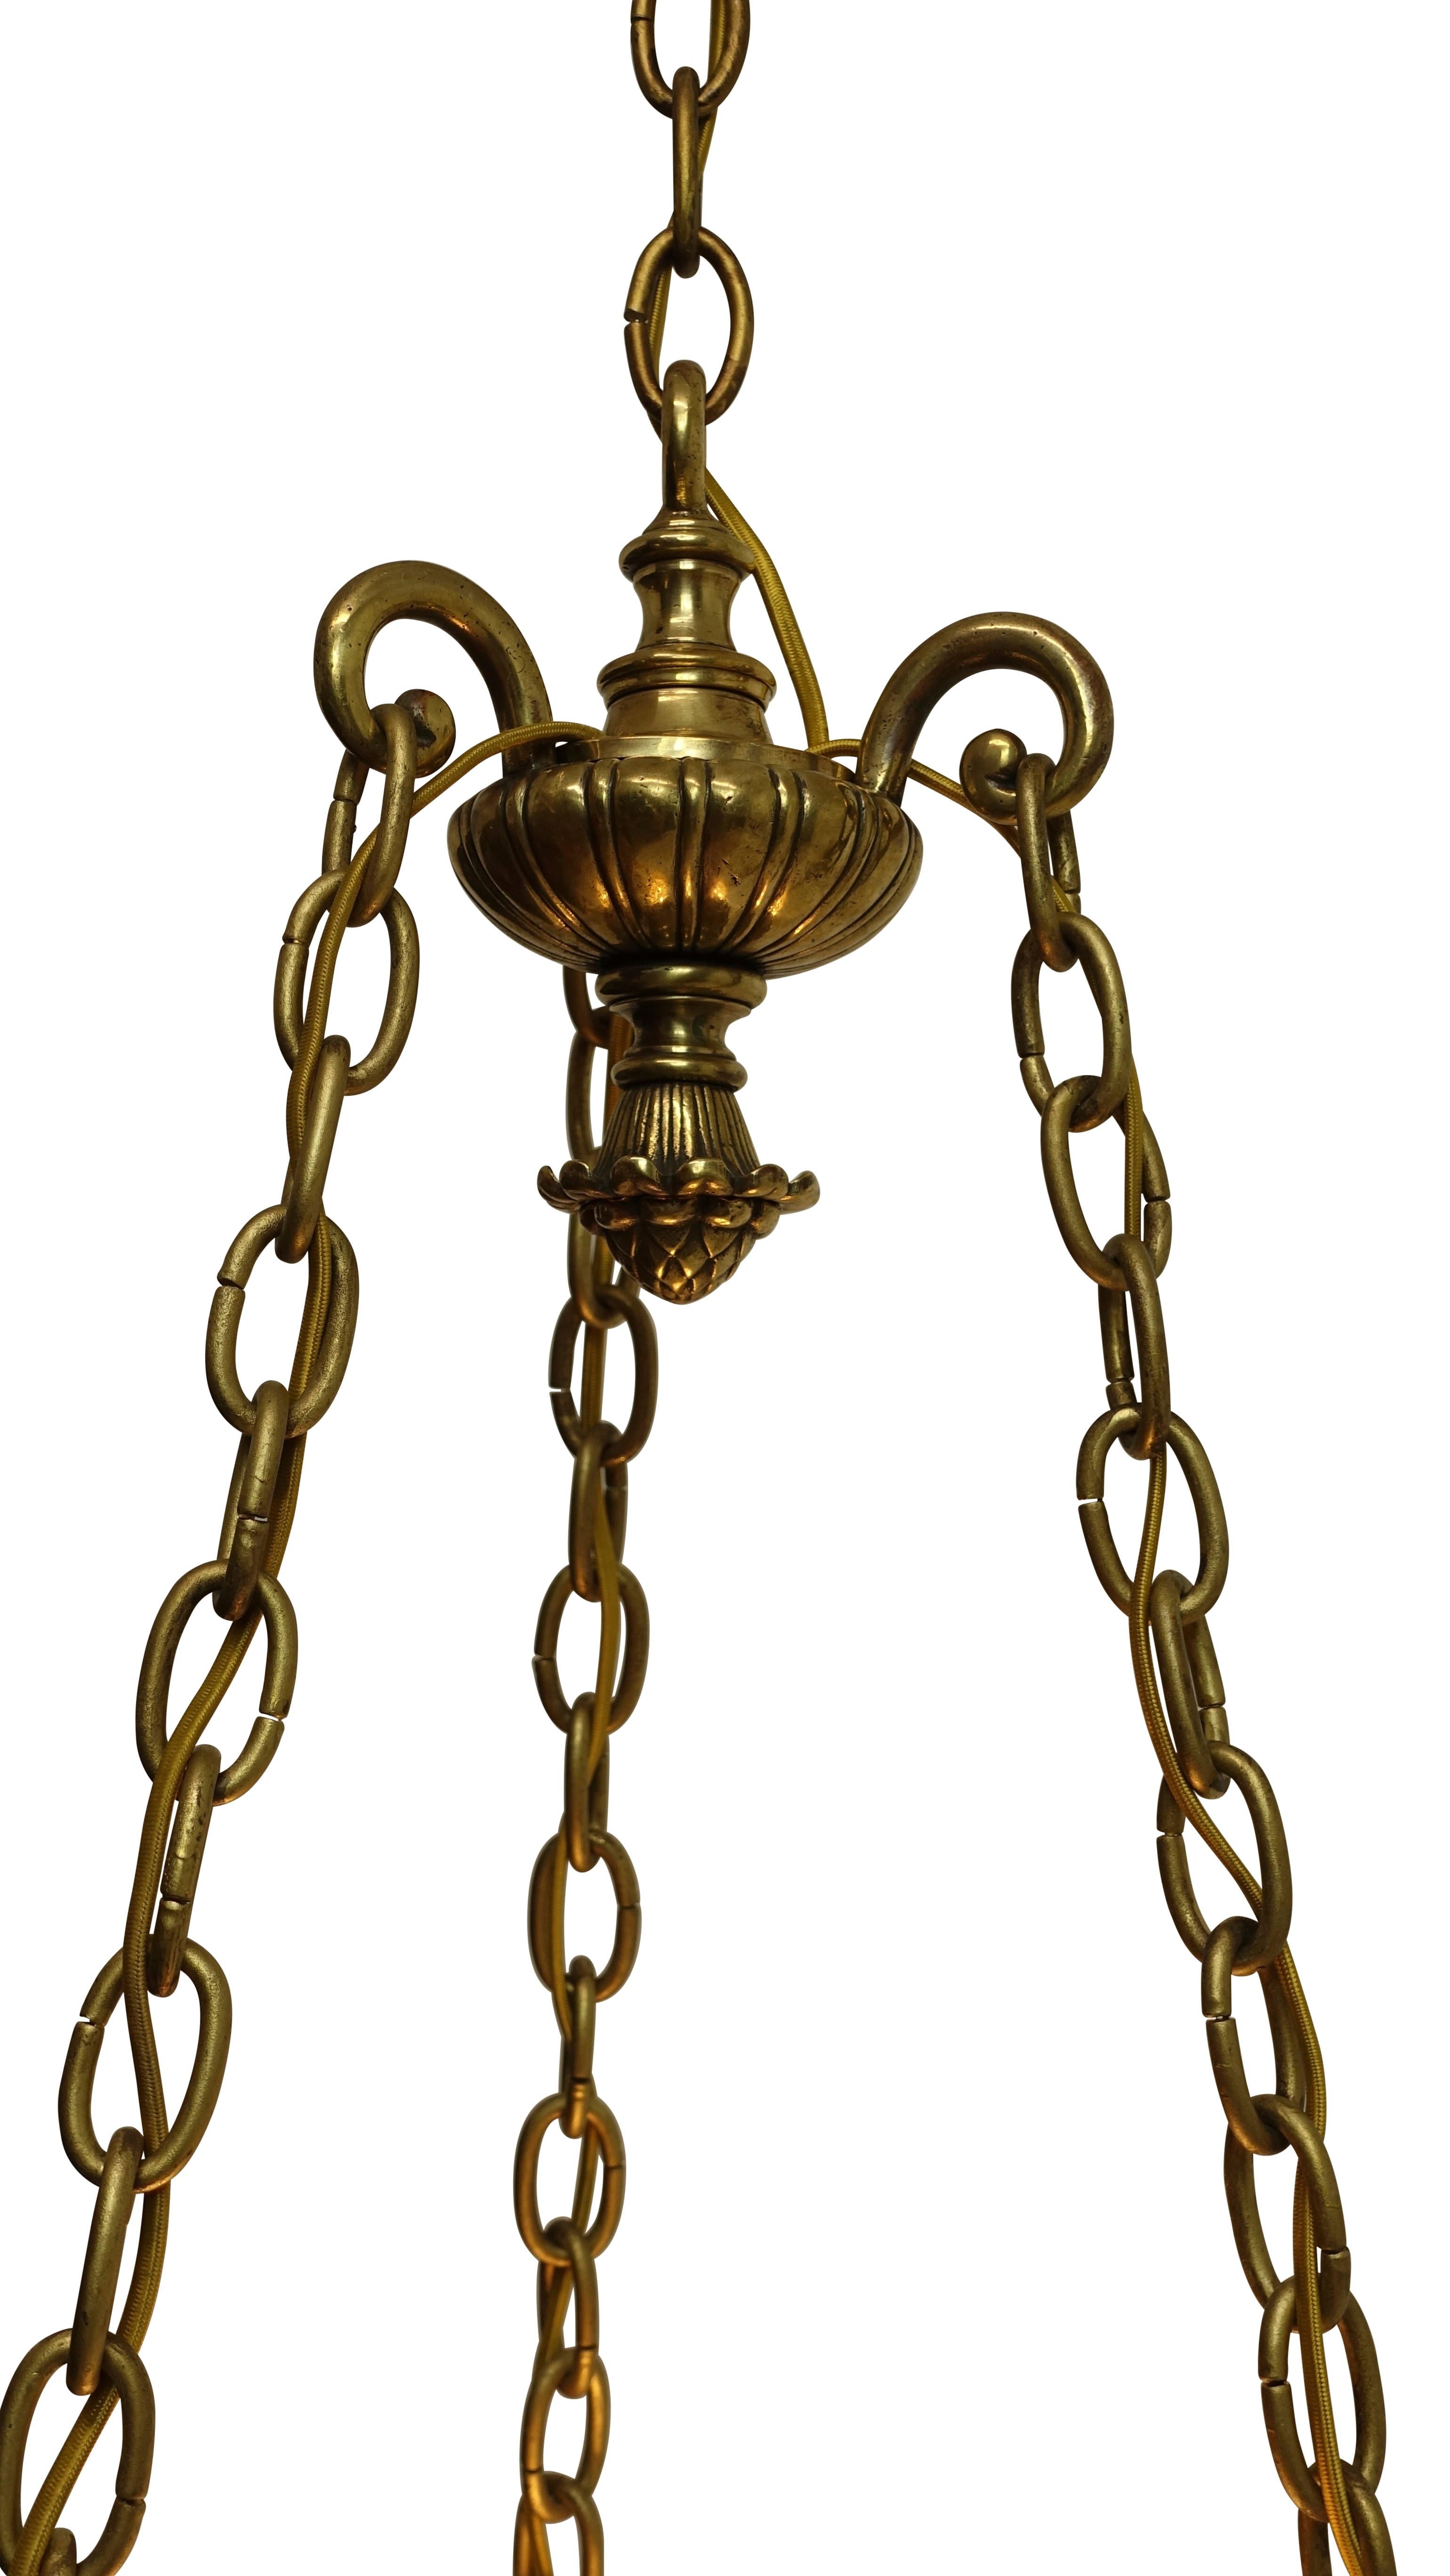 Carved Alabaster Pendant Light Fixture with Brass Hardware, Italian, circa 1910 For Sale 5